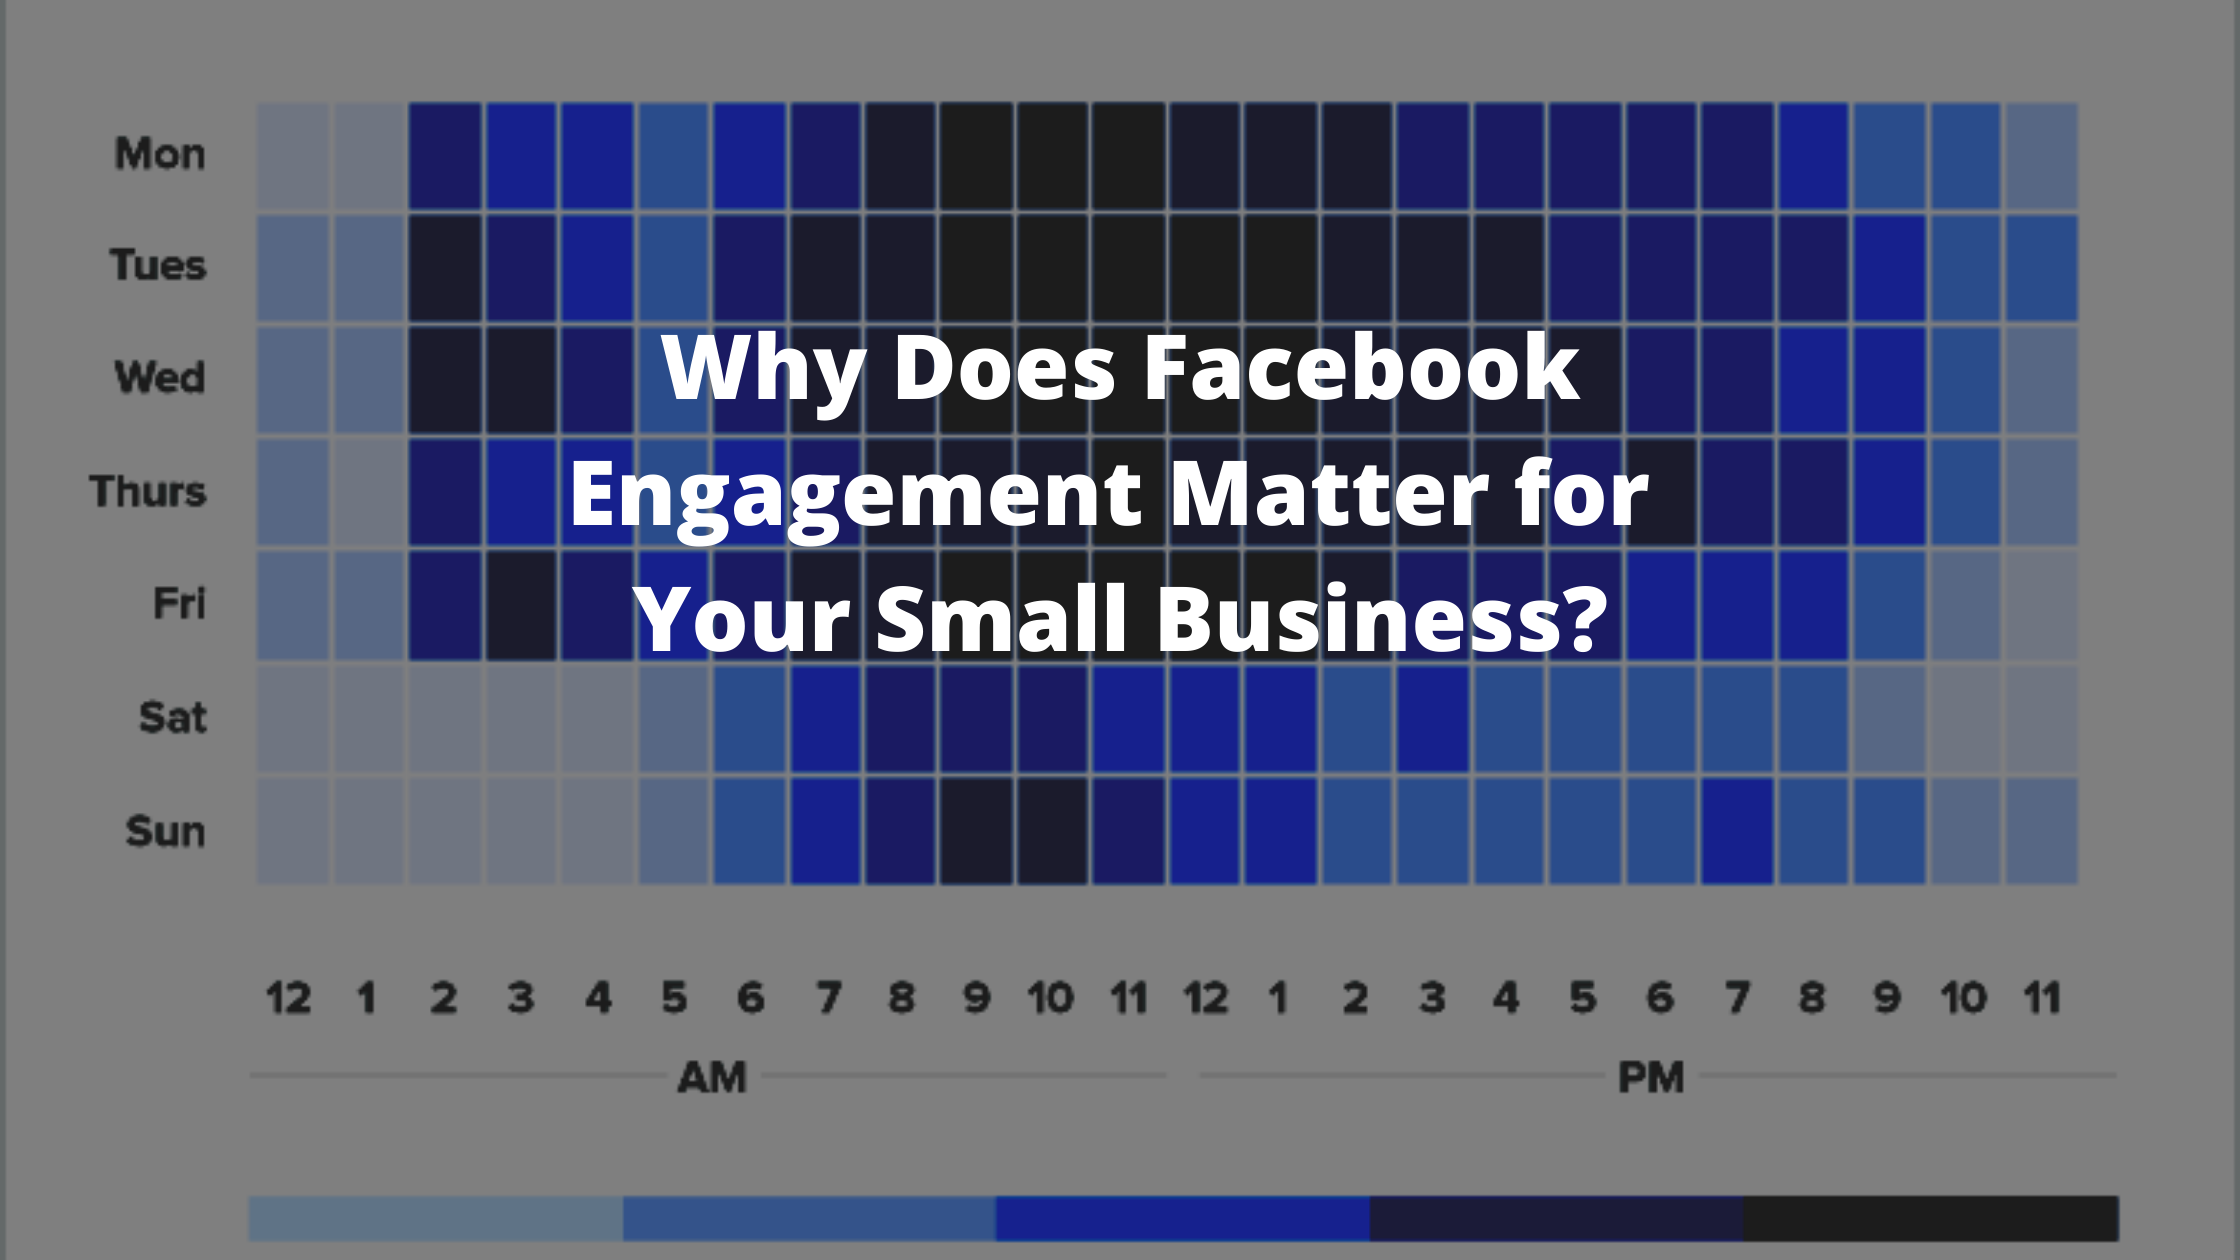 Why Does Facebook Engagement Matter for Your Small Business?